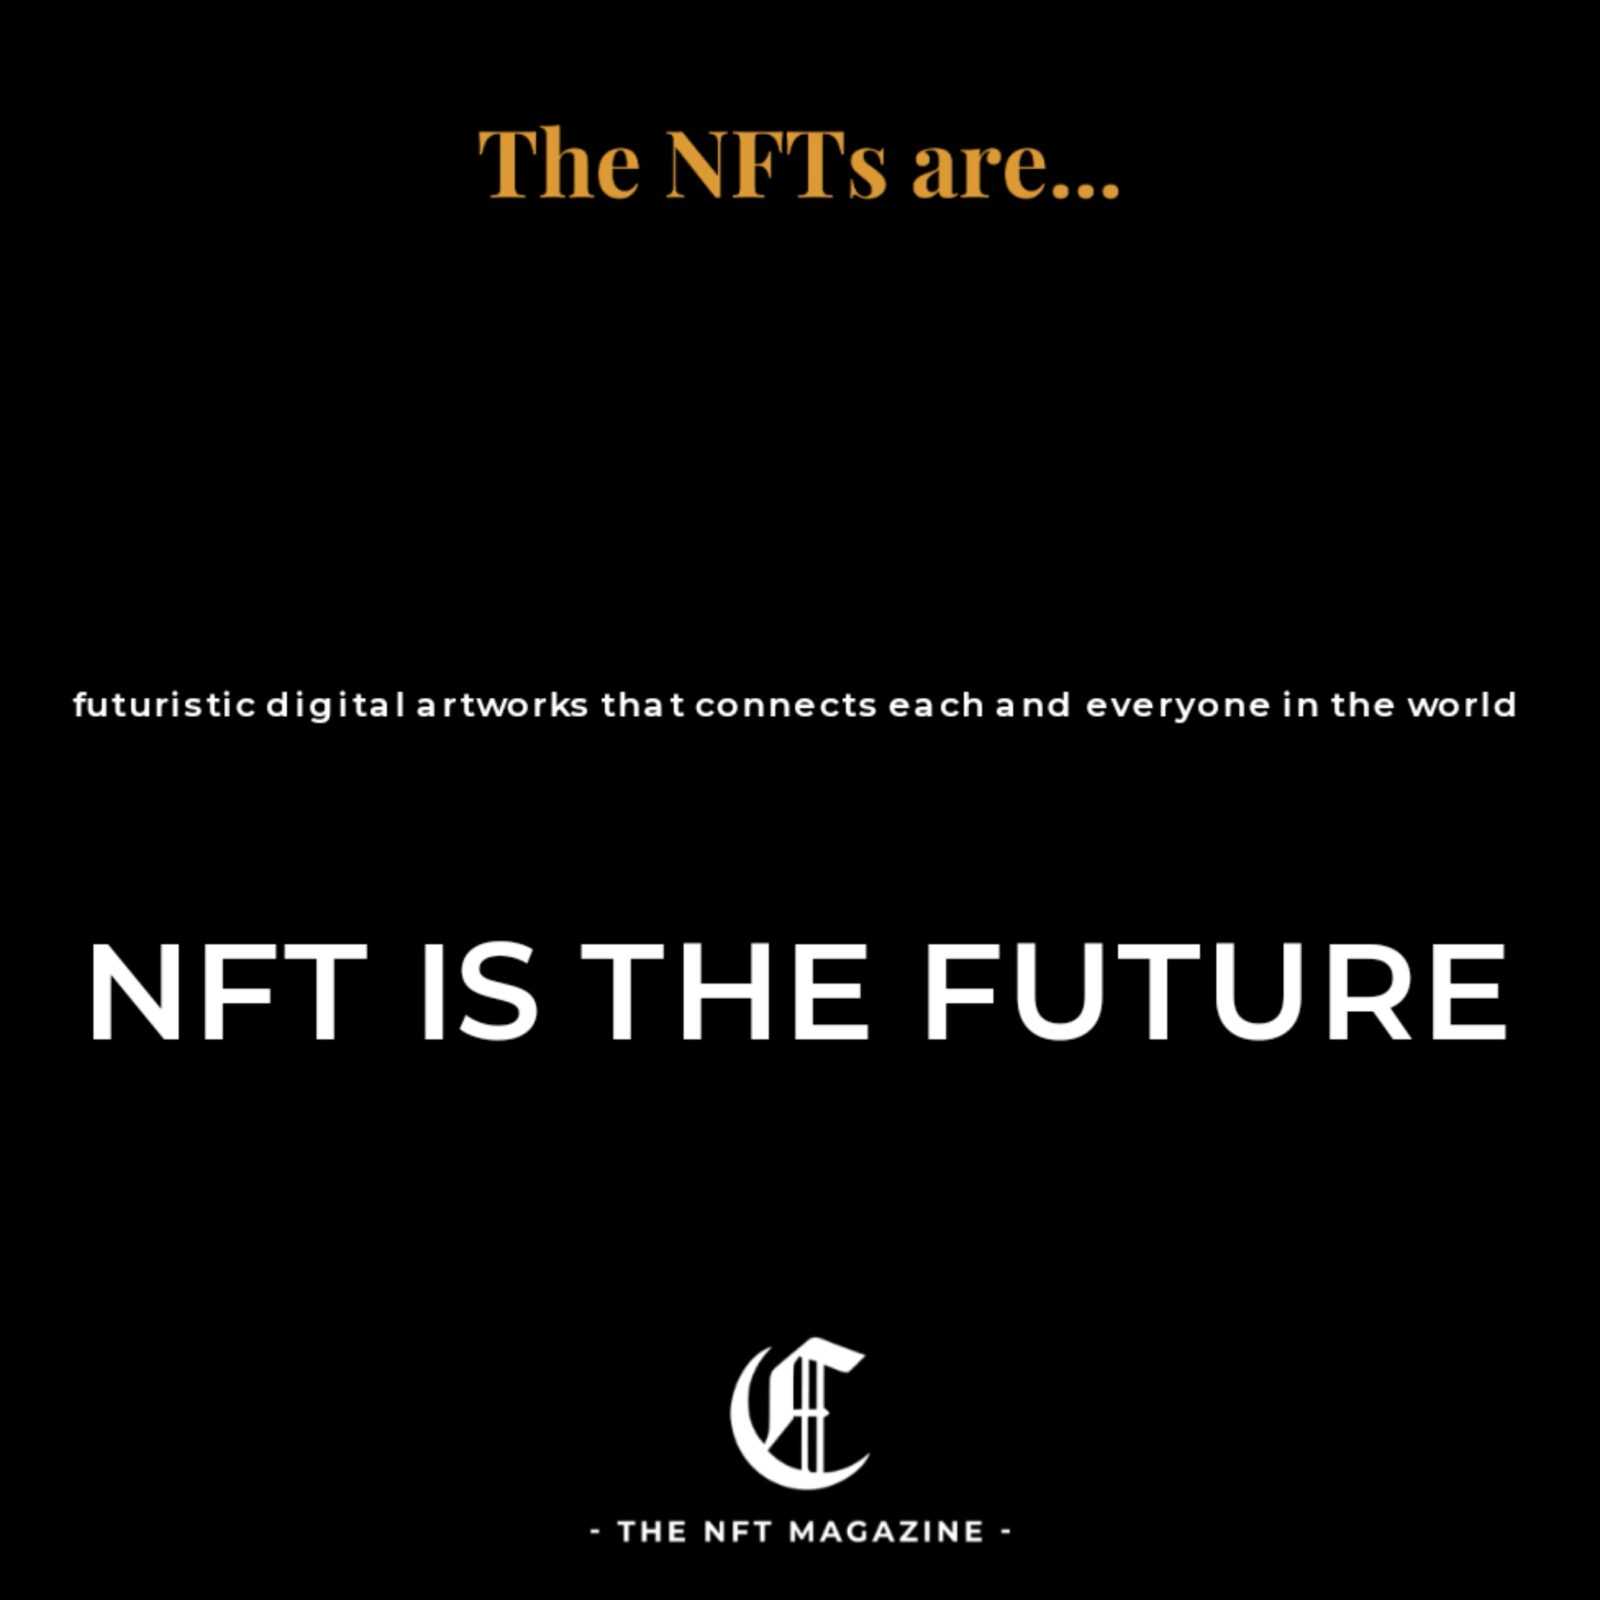 futuristic digital artworks that connects each and everyone in the world... NFT IS THE...